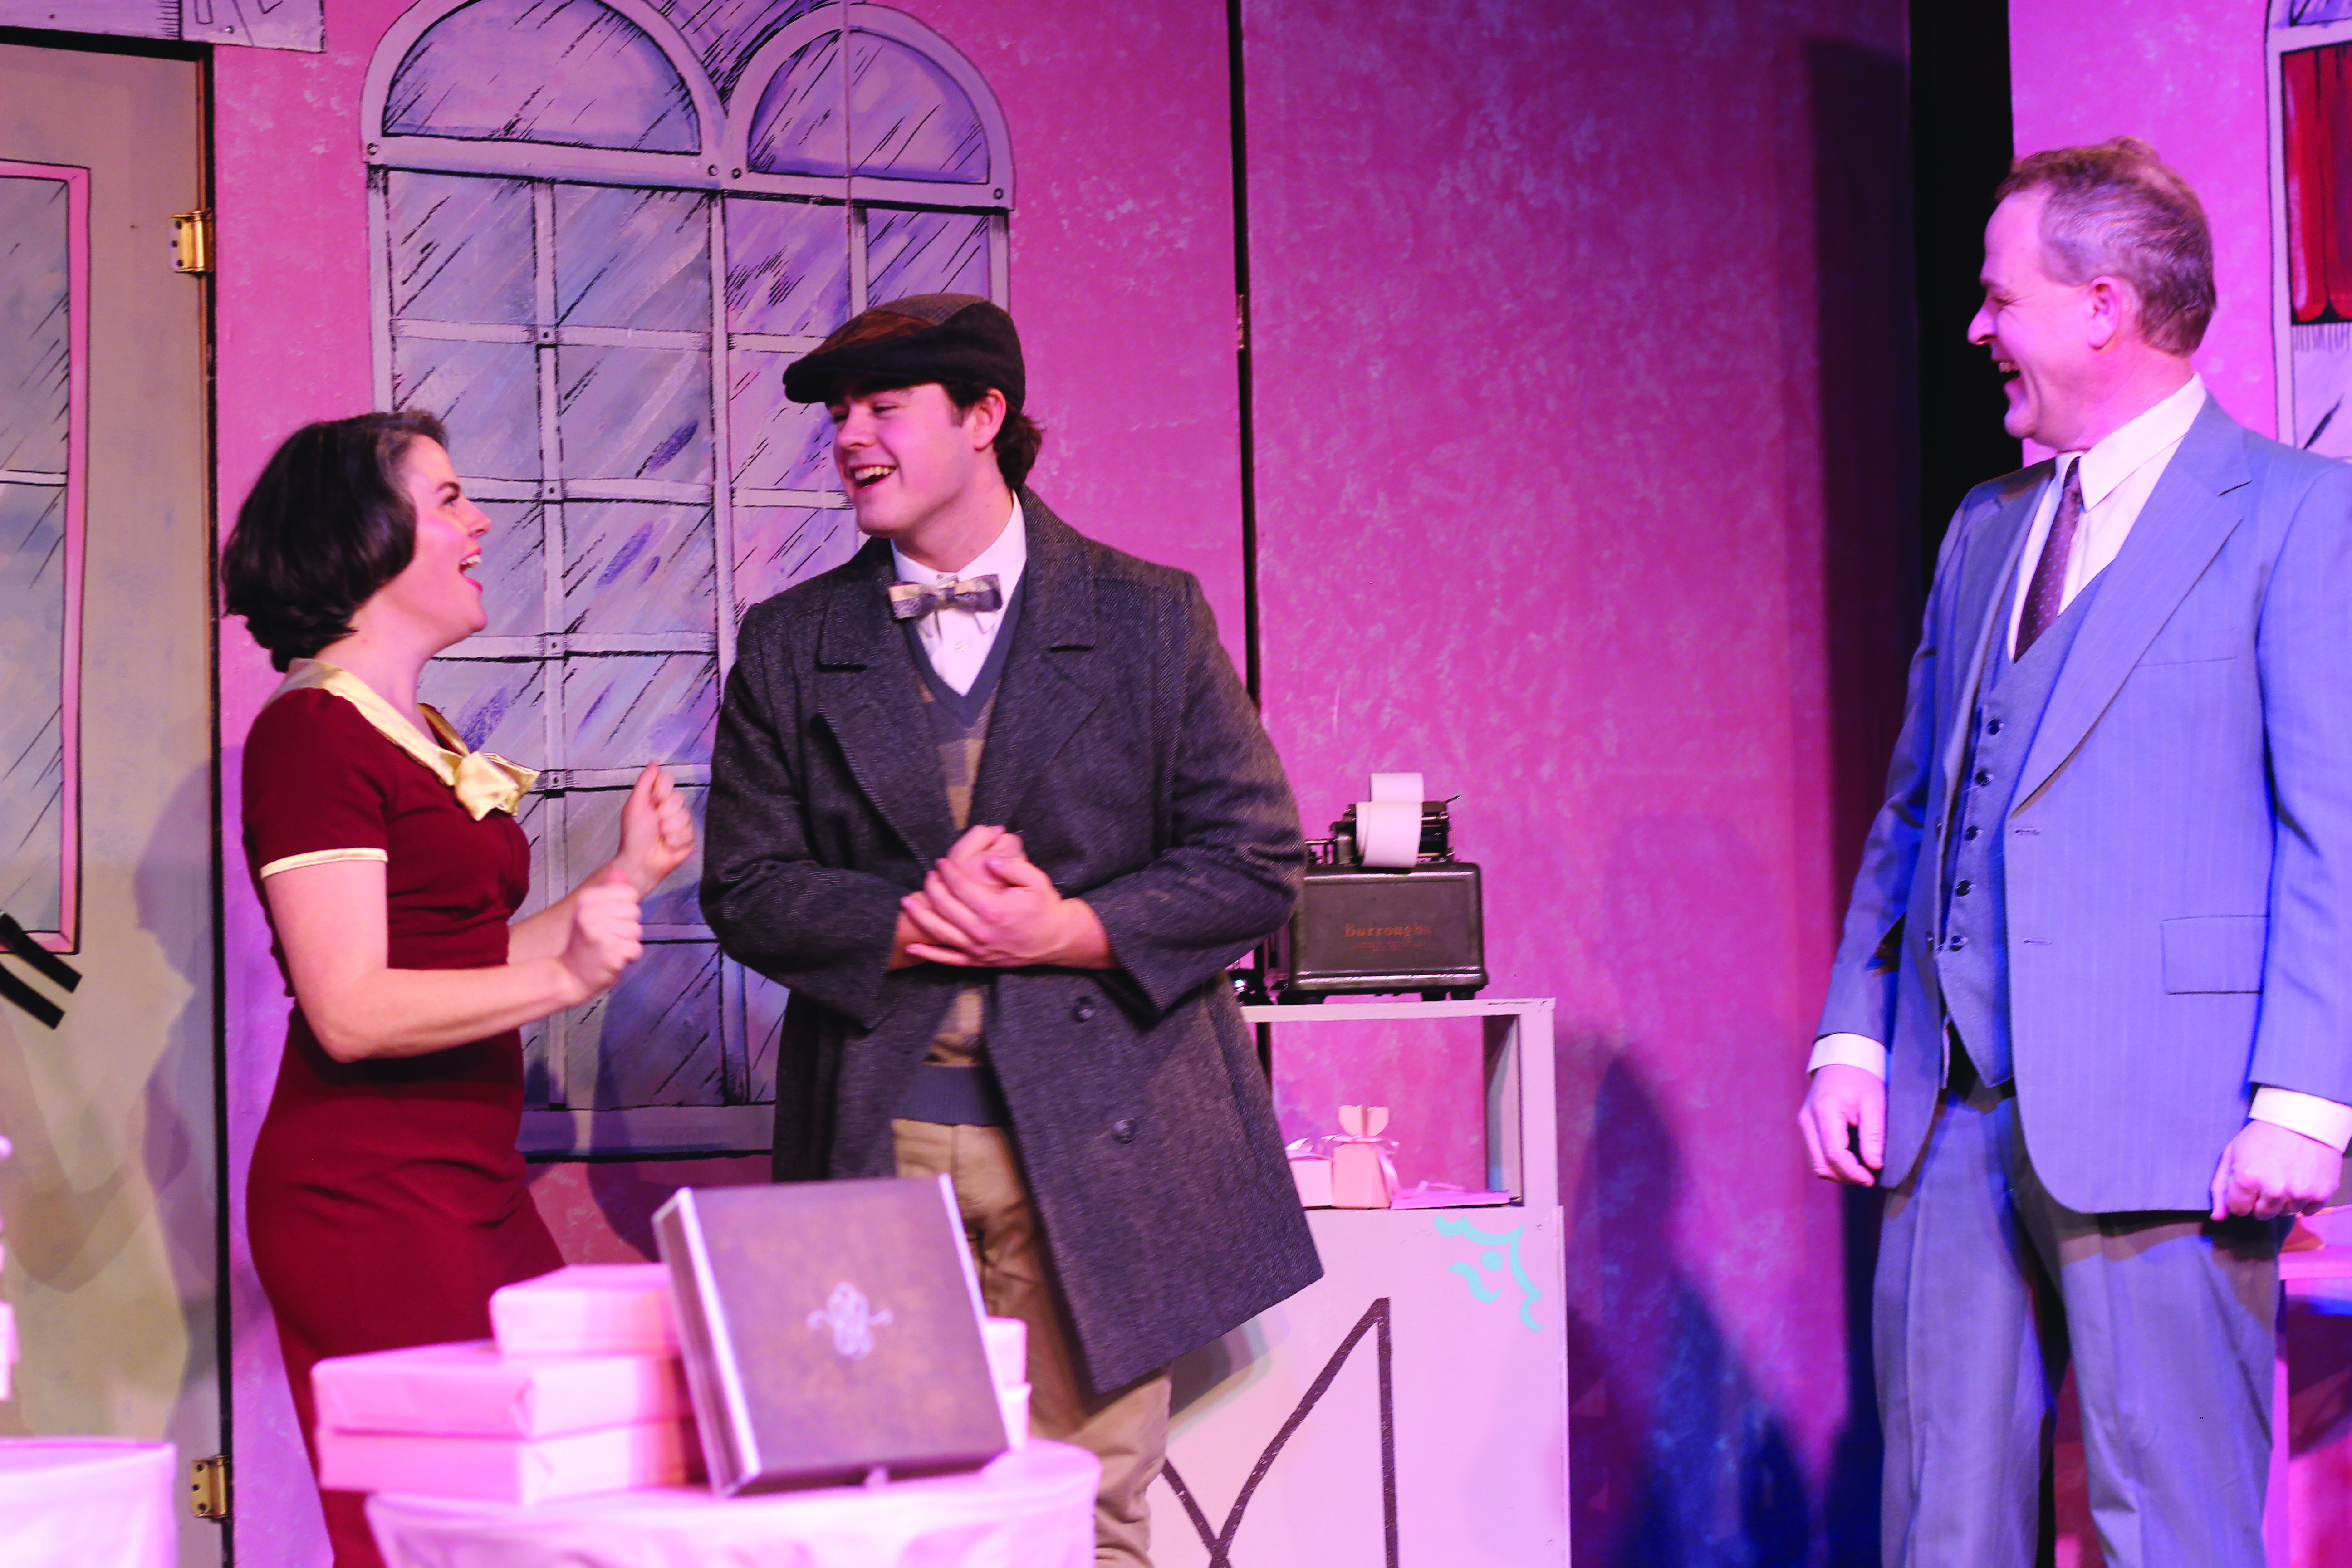 Luke Gray (center) as Arpad Laszlo in "She Loves Me" by Theatre Bristol. Also show are Leah Graham as Ilona Ritter and Dan Gray as Ladislav Sipos.